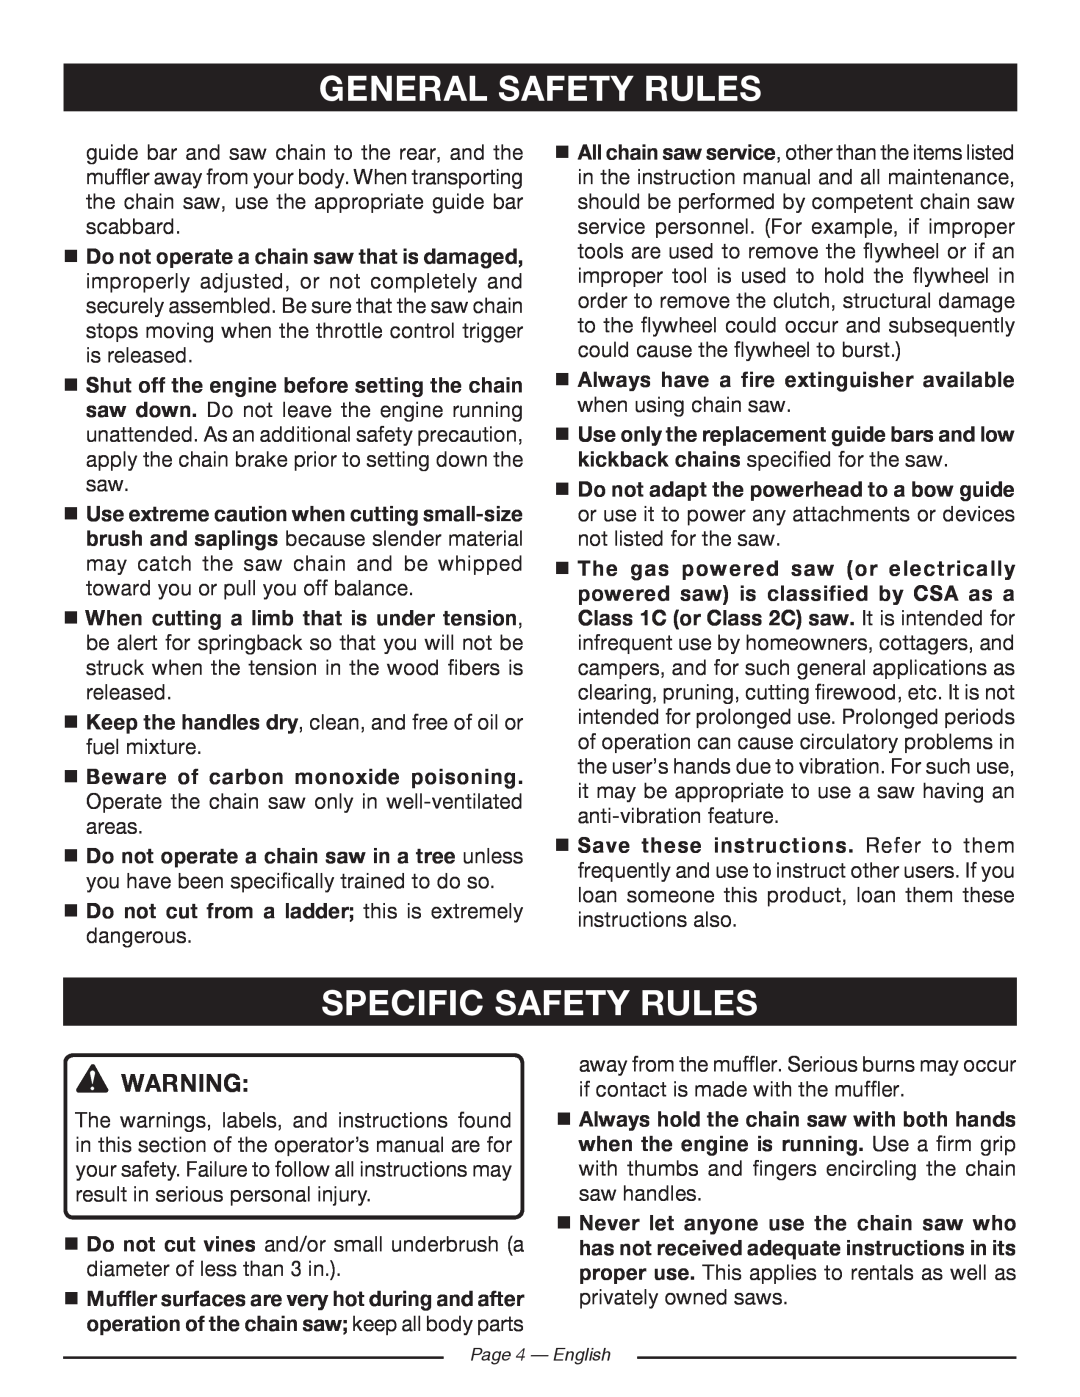 Ryobi RY10520, RY10518 Specific Safety Rules,  Do not adapt the powerhead to a bow guide, General Safety Rules 